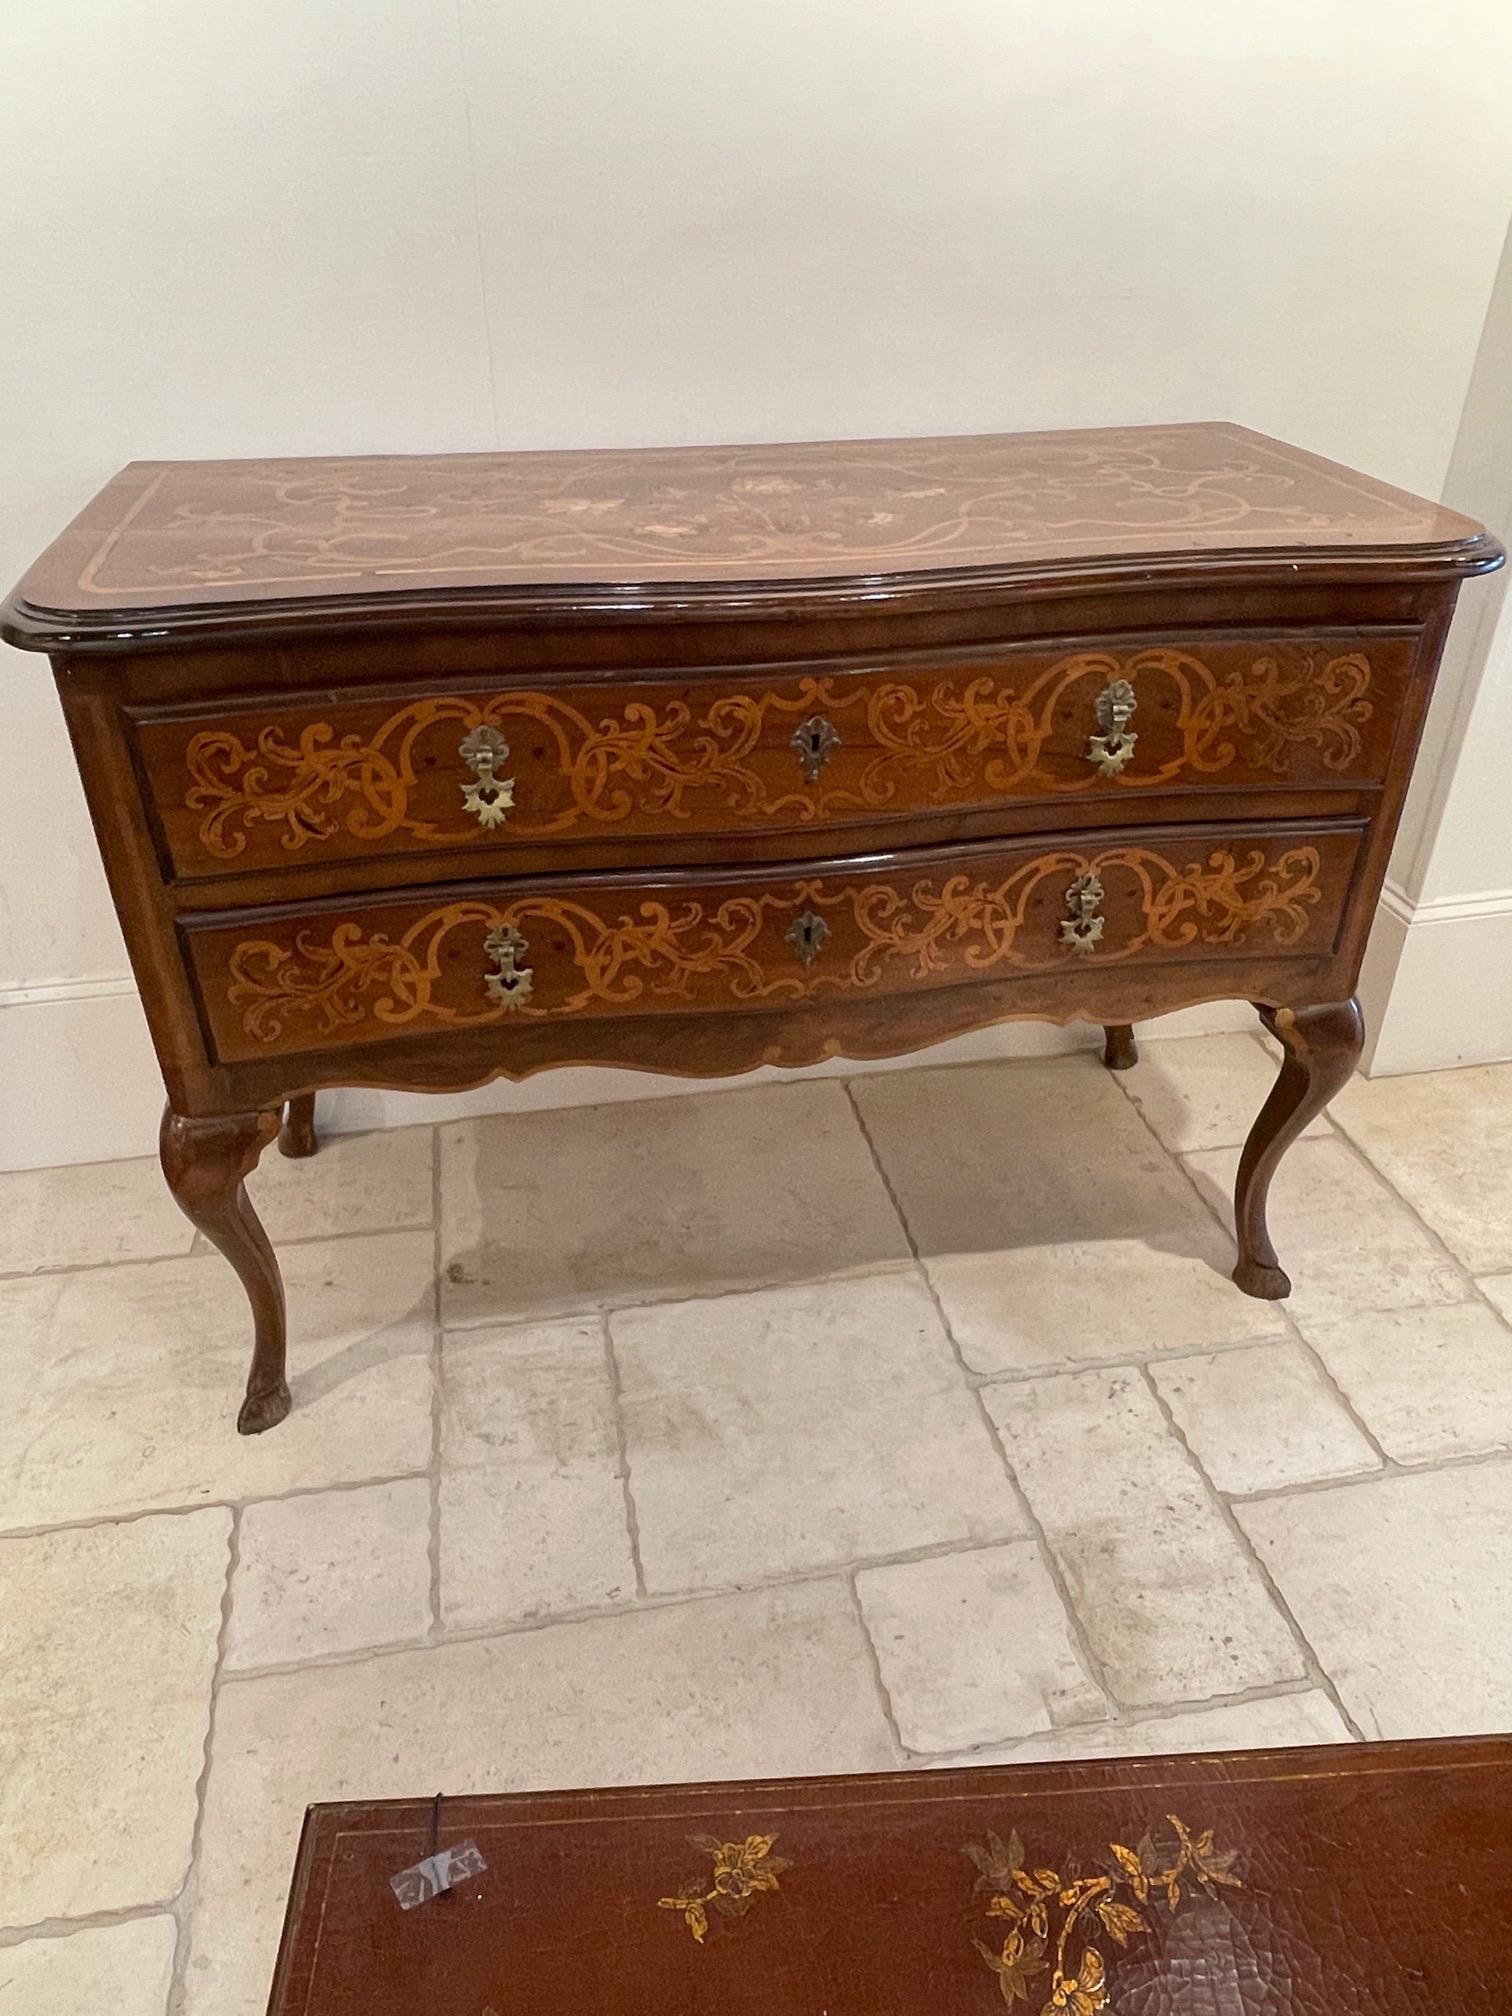 Beautiful 19th century Italian walnut marquetry inlaid commode Lovely pattern on the inlay including floral images. The piece also has 2 drawers for storage. So pretty!!